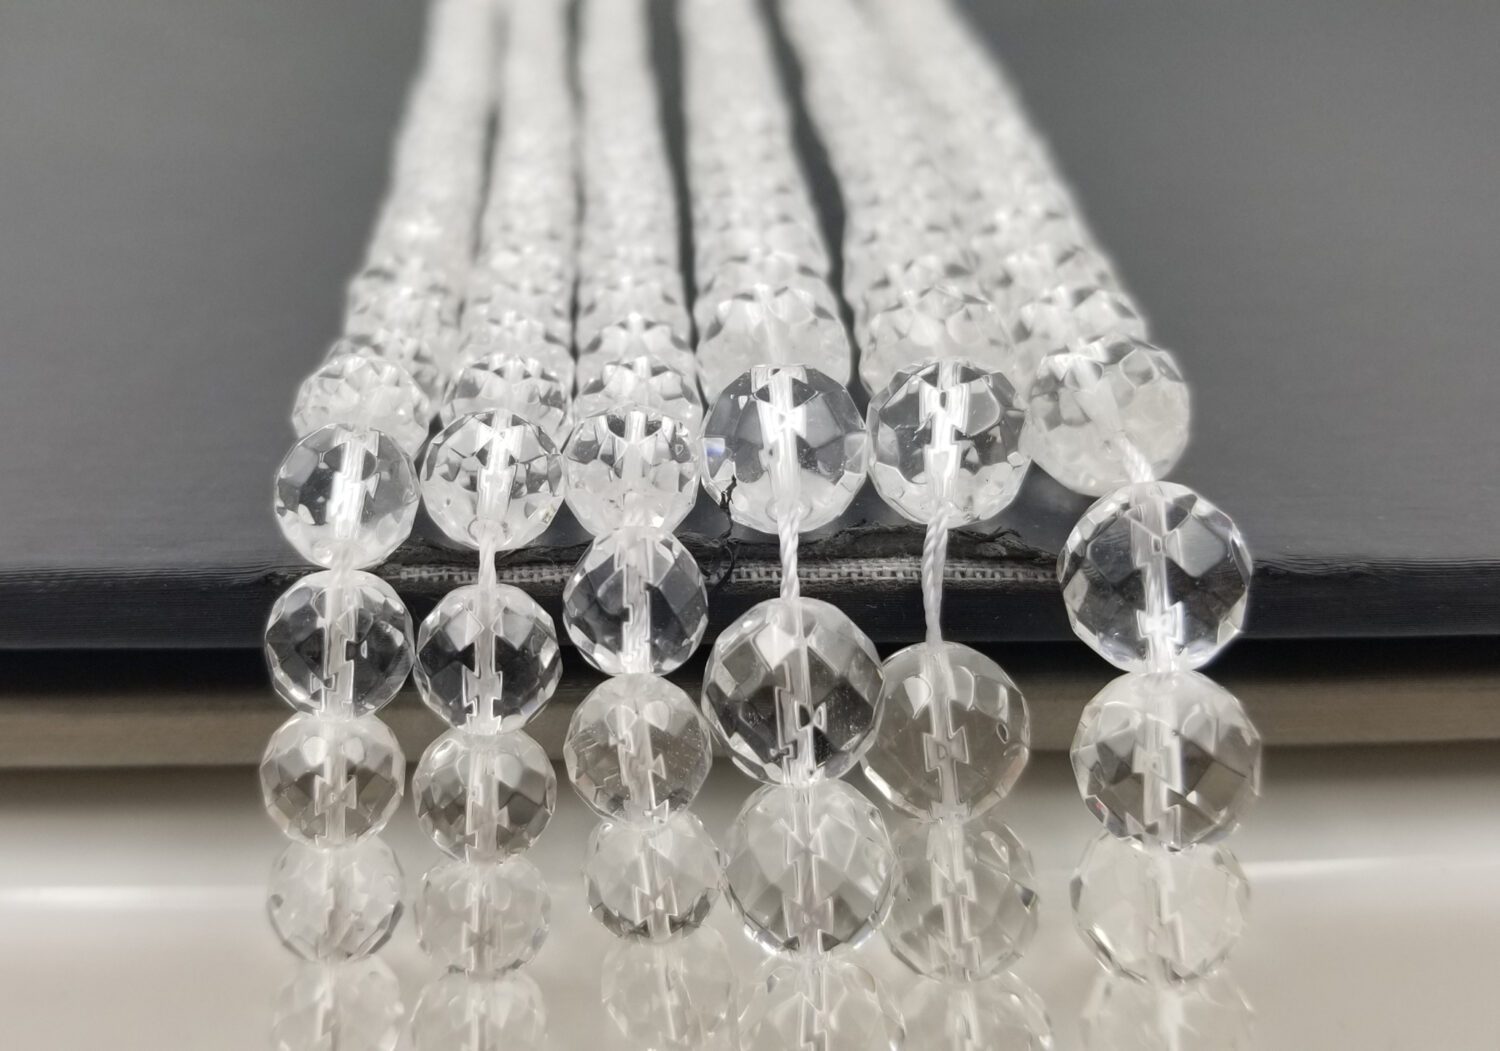 L/ Cracked Crystal 16mm/ 18mm Smooth Round Beads 16 Strand Grade A Nice  Quality Clear Quartz Large Beads for Jewelry Making 